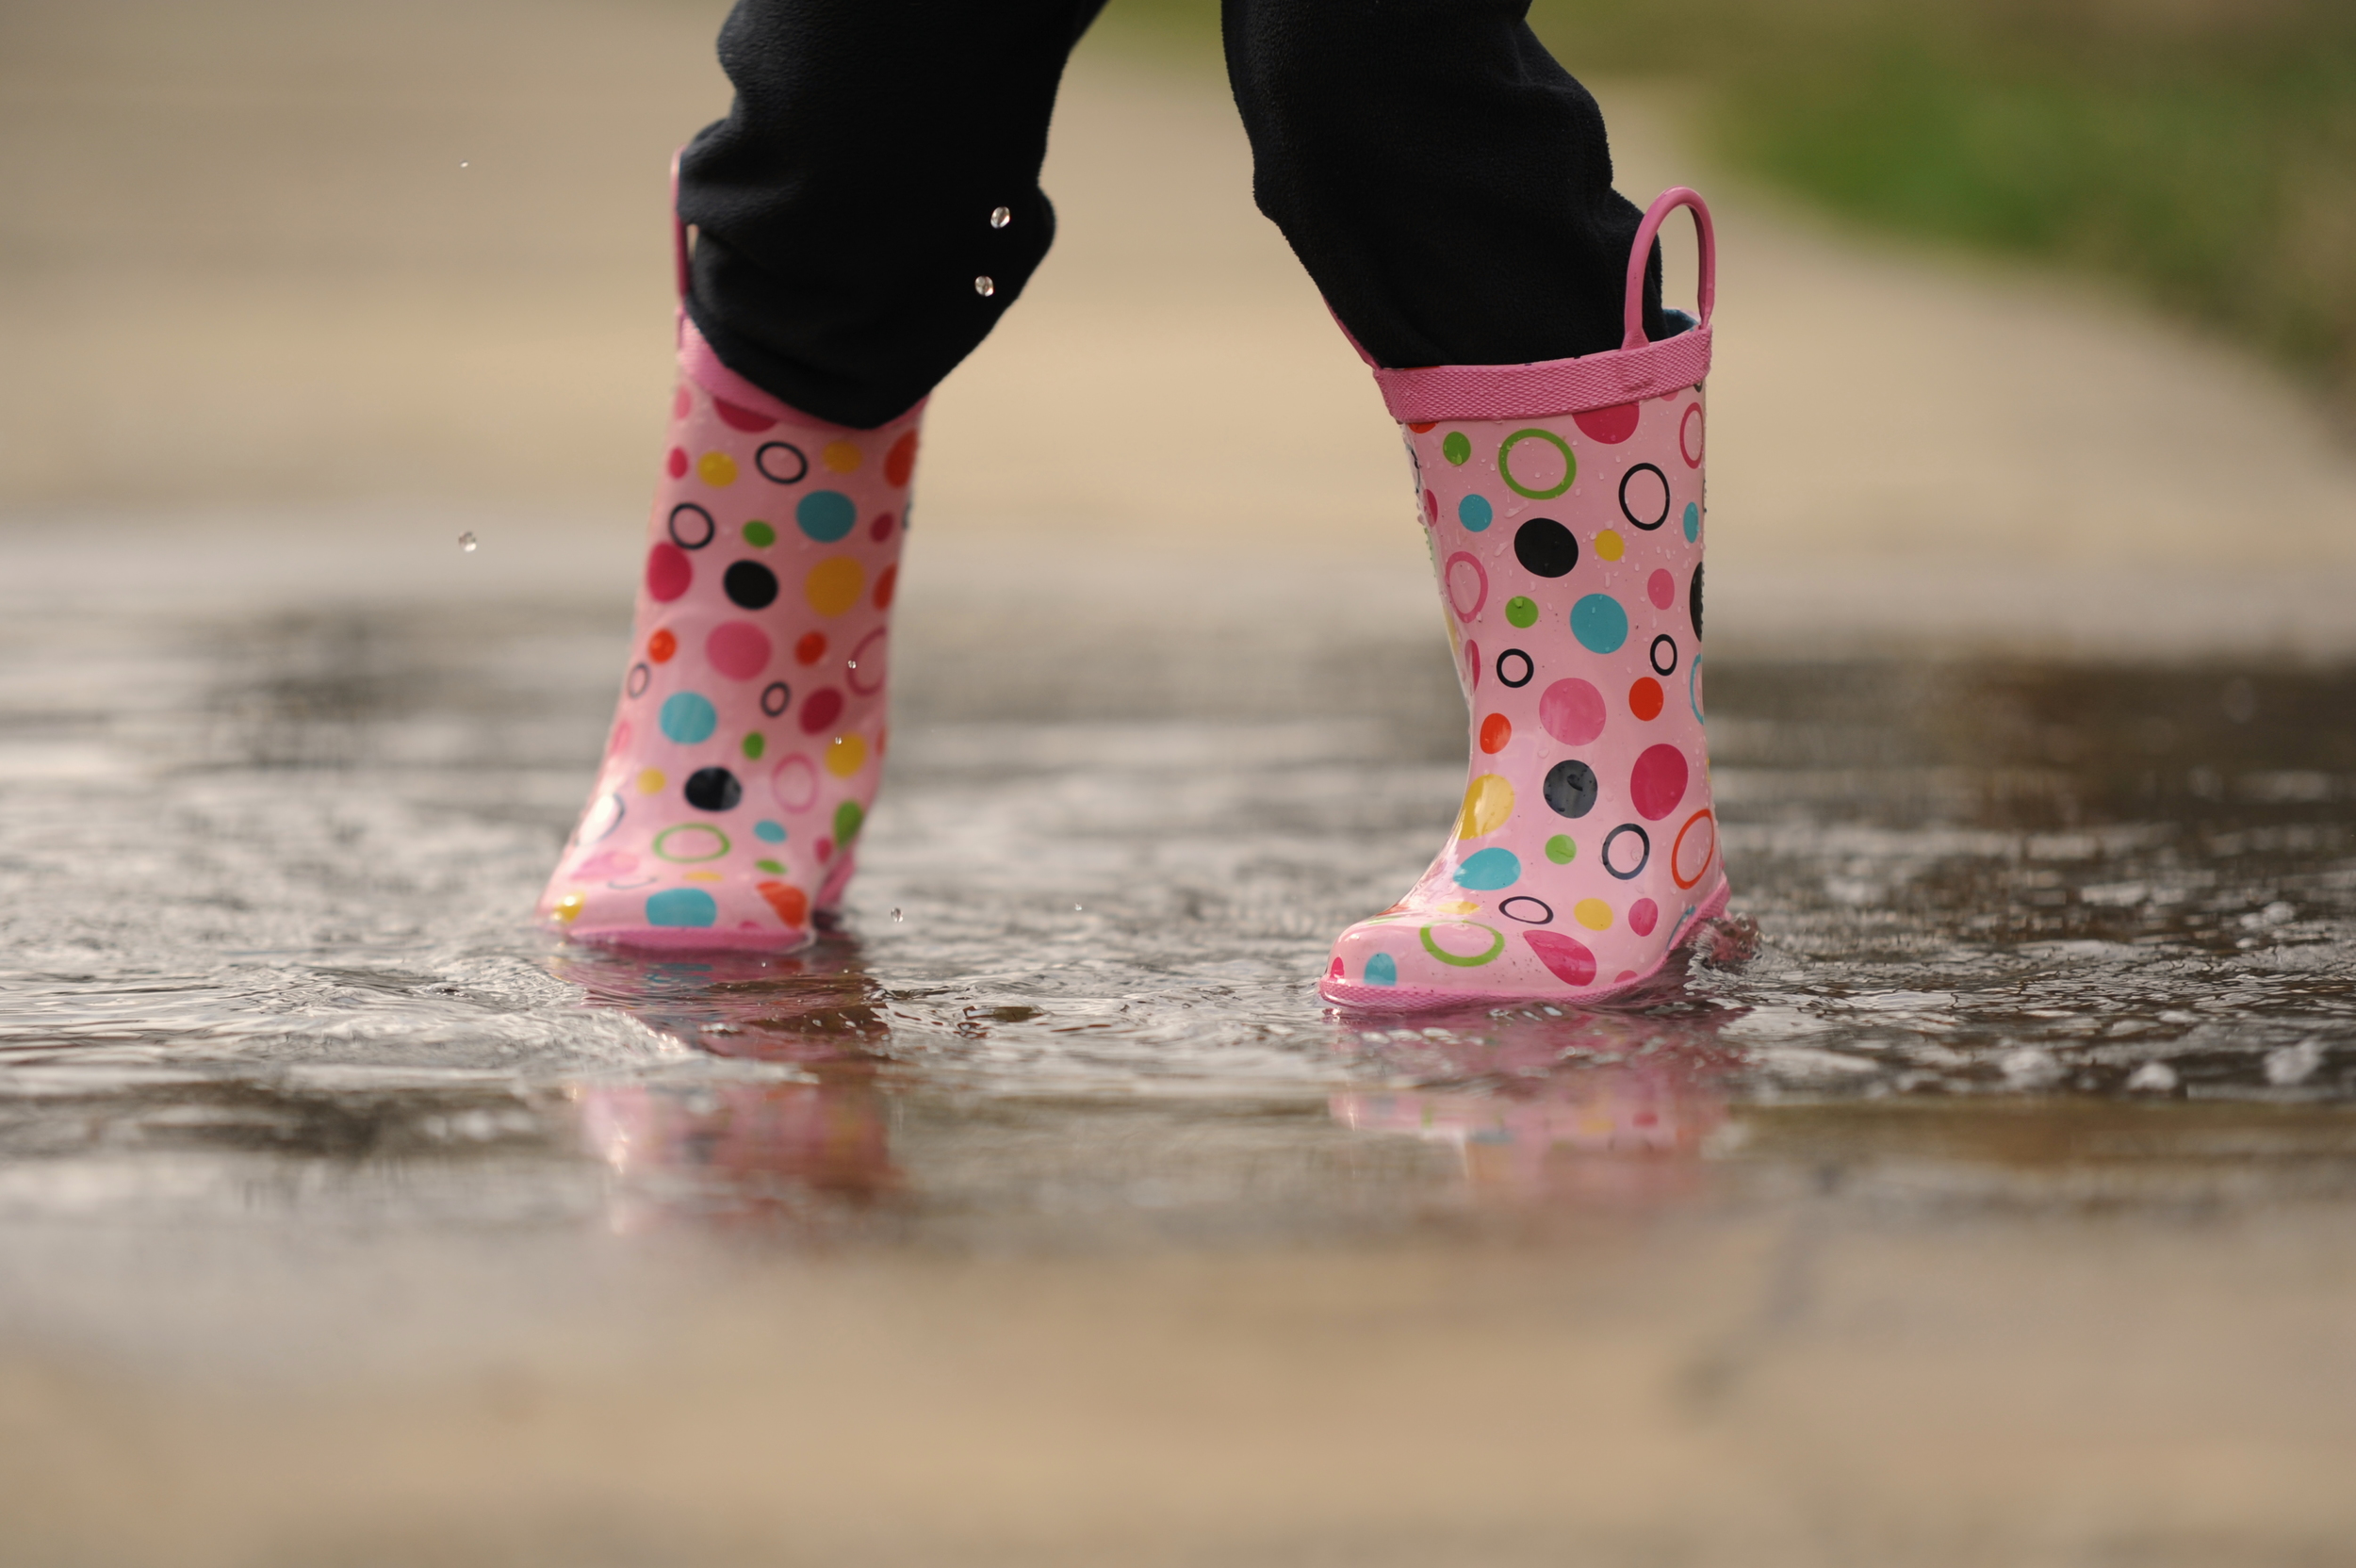 031611_Puddles Play March 2011_2249.JPG